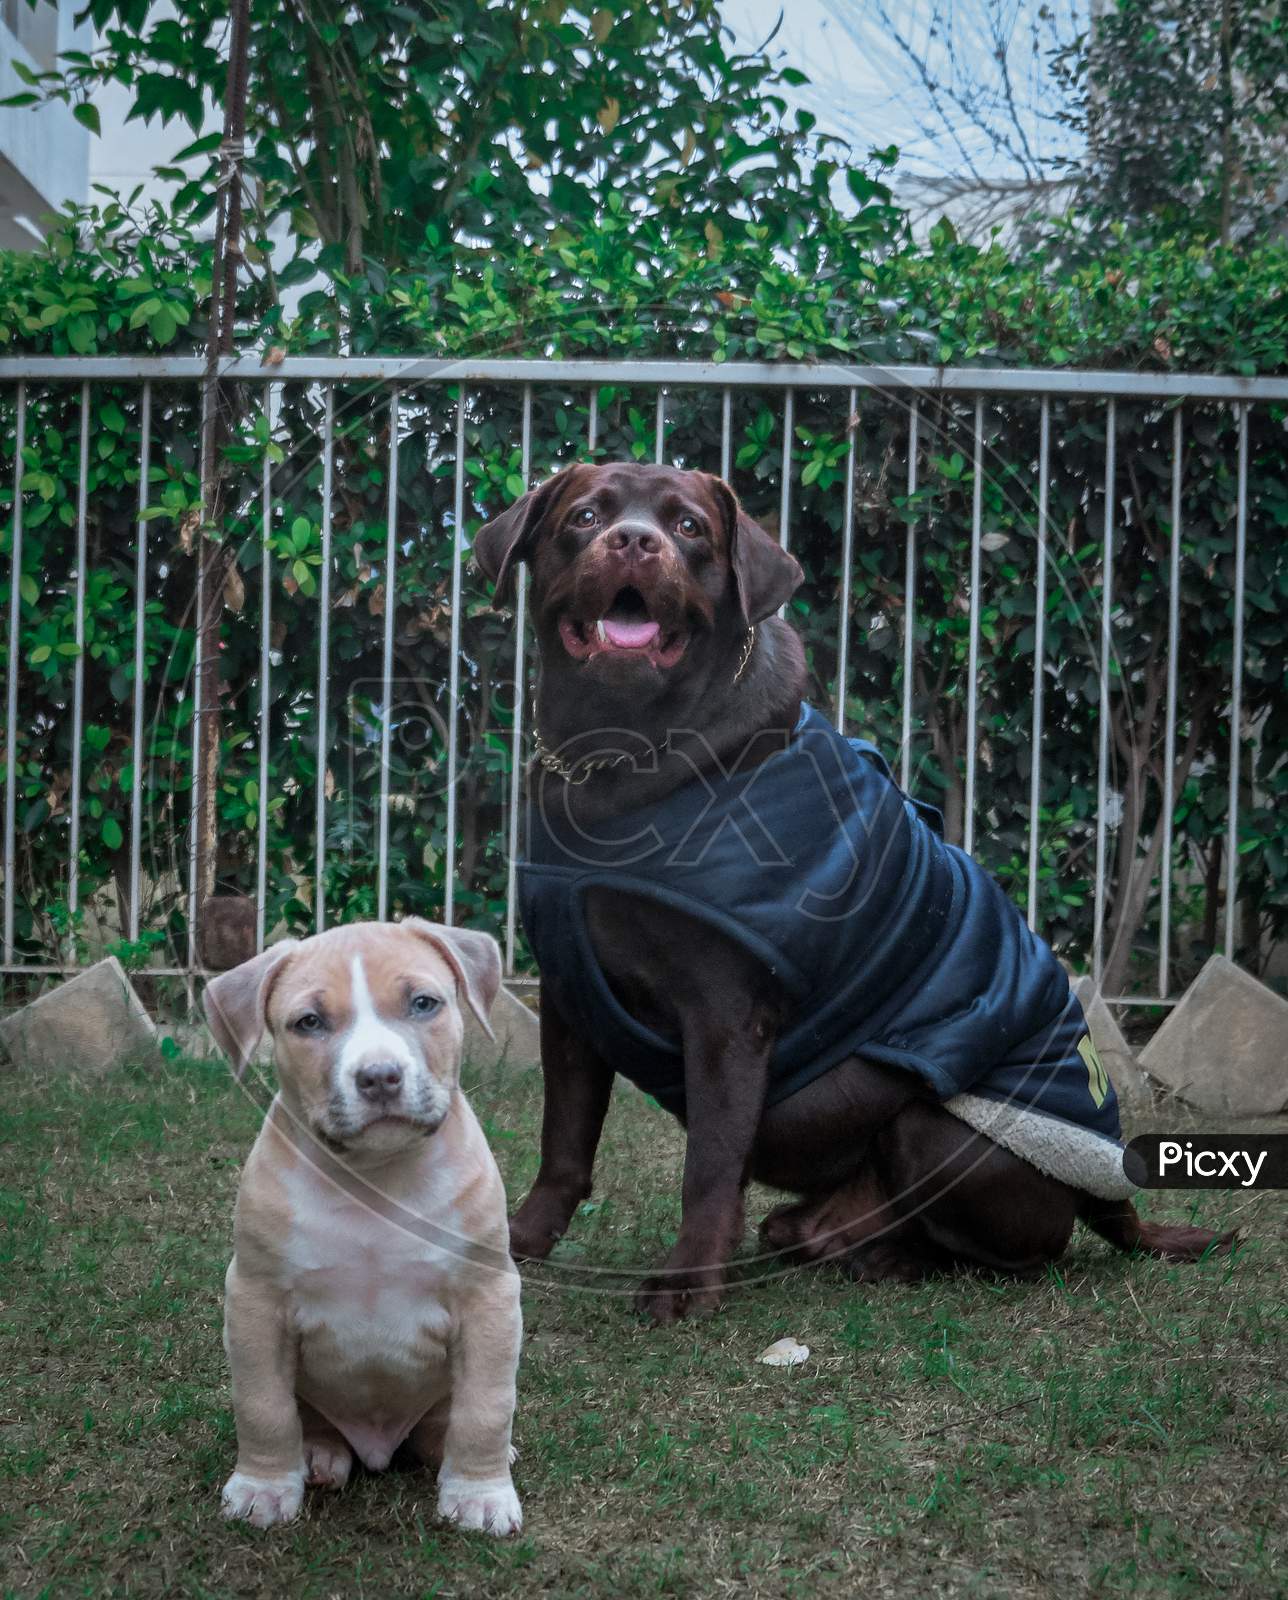 American bully puppy posing with adult Labrador dog